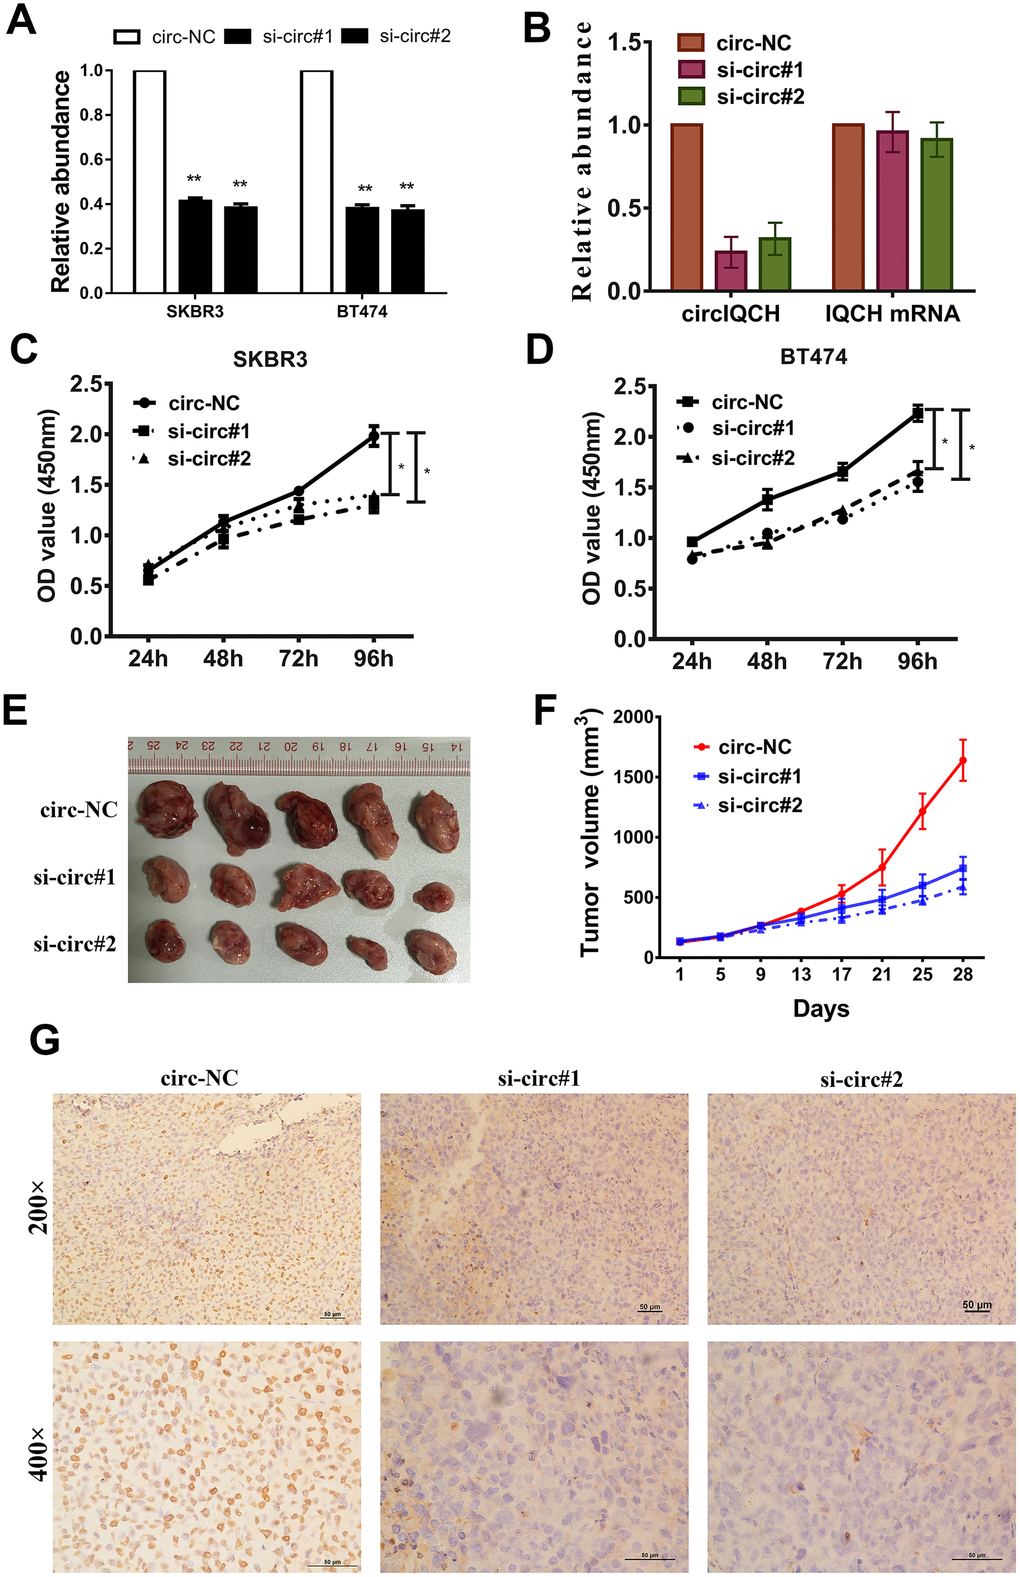 Downregulation of circIQCH suppresses the proliferation of breast cancer cells. (A) Knock down of circIQCH was assessed by qRT-PCR analysis. (B) si-circIQCH decreased the expression of circIQCH while had no effect on linear IQCH mRNA. (C, D) CCK-8 assays detected cell proliferation. (E) Mouse xenograft models were established. (F) Tumor volume was estimated in every four days. (G) The xenograft tumors were analyzed by immunohistochemistry analysis, and the representative images of ki-67 expression are presented. *P**P